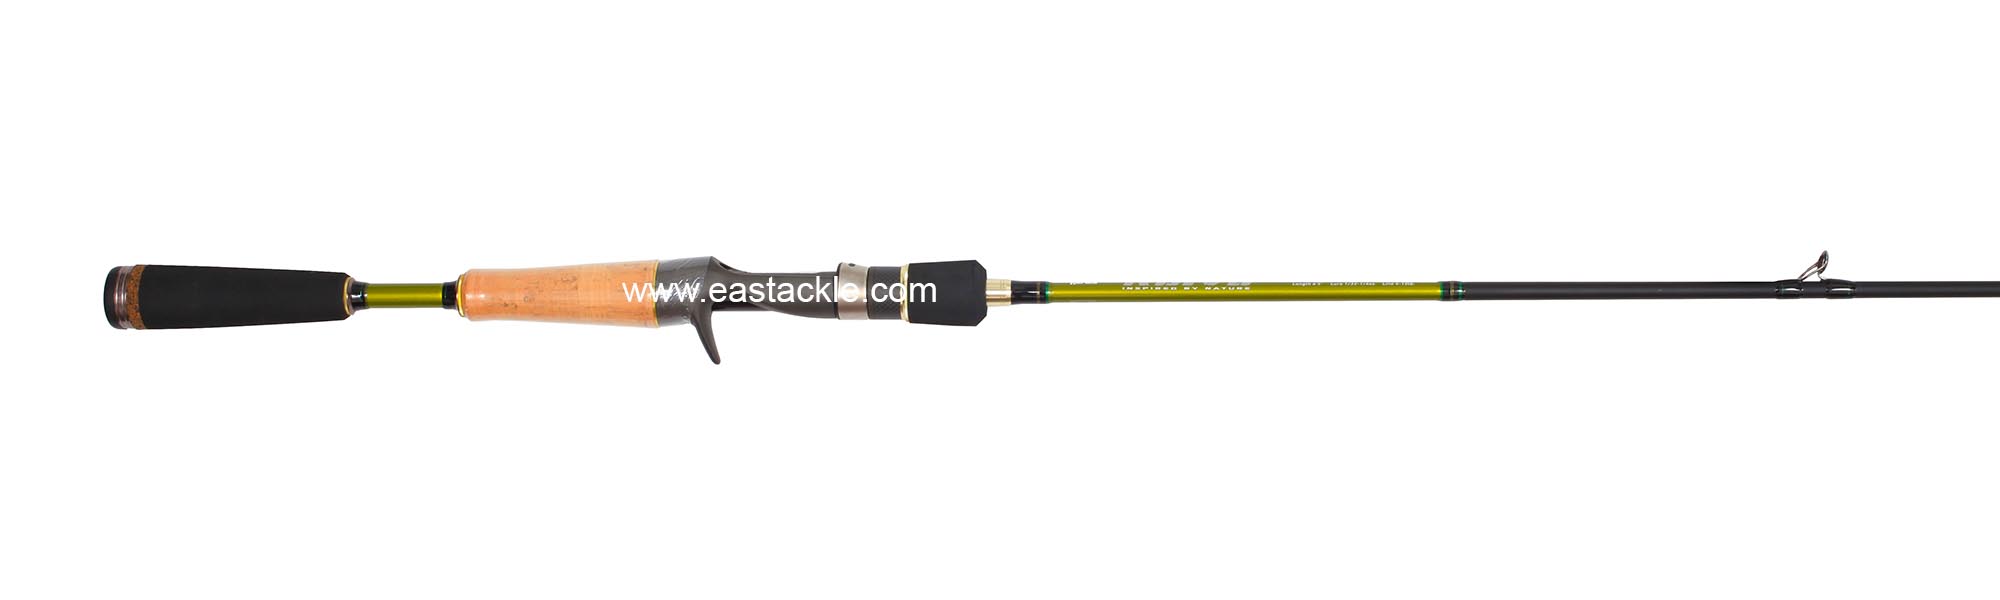 Rapala - Koivu - KVC651L - Bait Casting Rod - Butt to Stripper Guide (Side View) | Eastackle